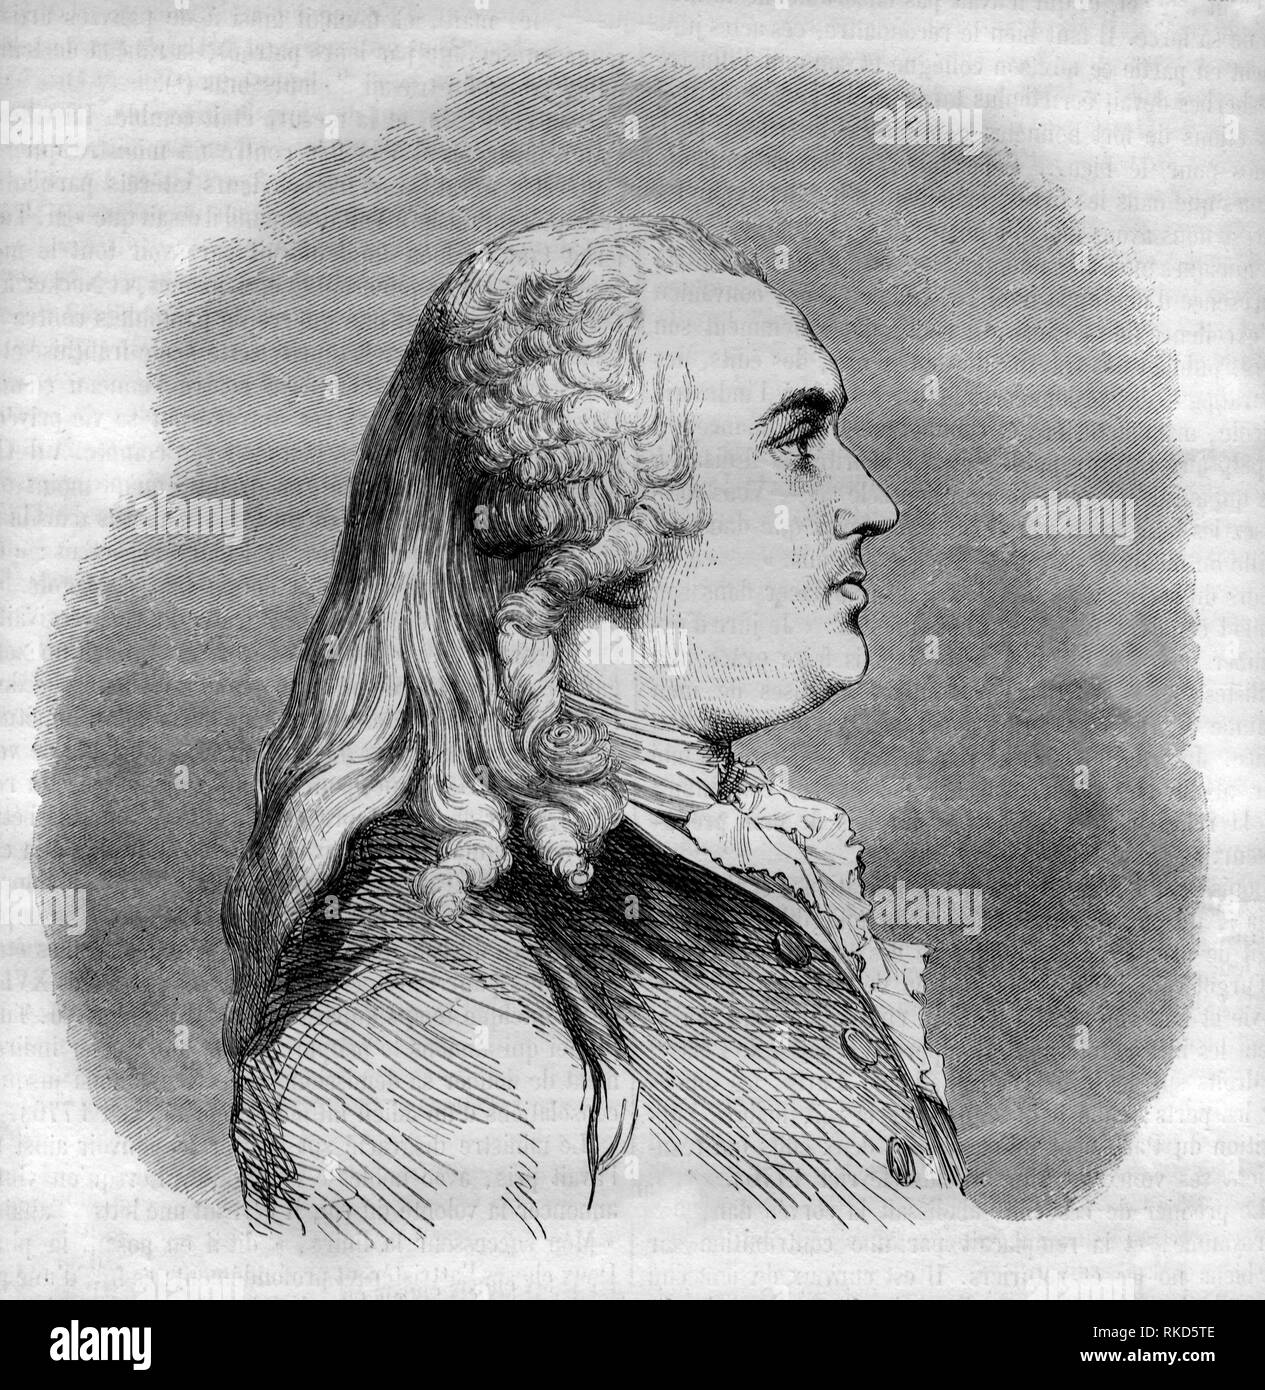 Anne Robert Jacques Turgot, Baron de l'Aulne (10 May 1727 - 18 March 1781), commonly known as Turgot, was a French economist and statesman. Stock Photo